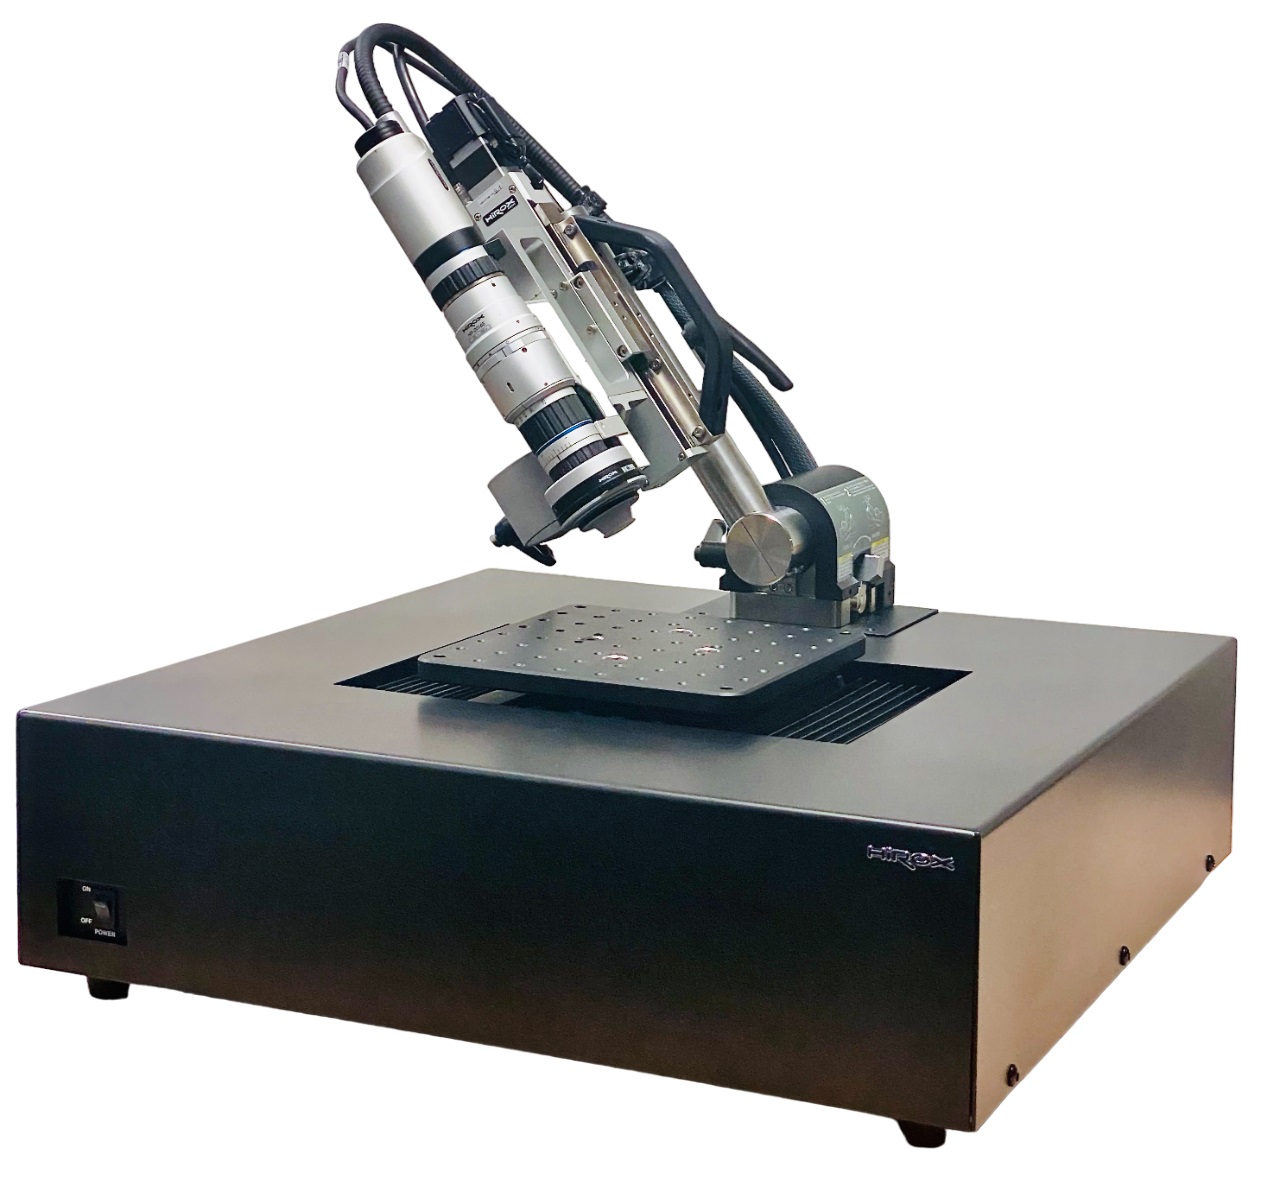 ST-AS-X Hirox high-precision microscope stand